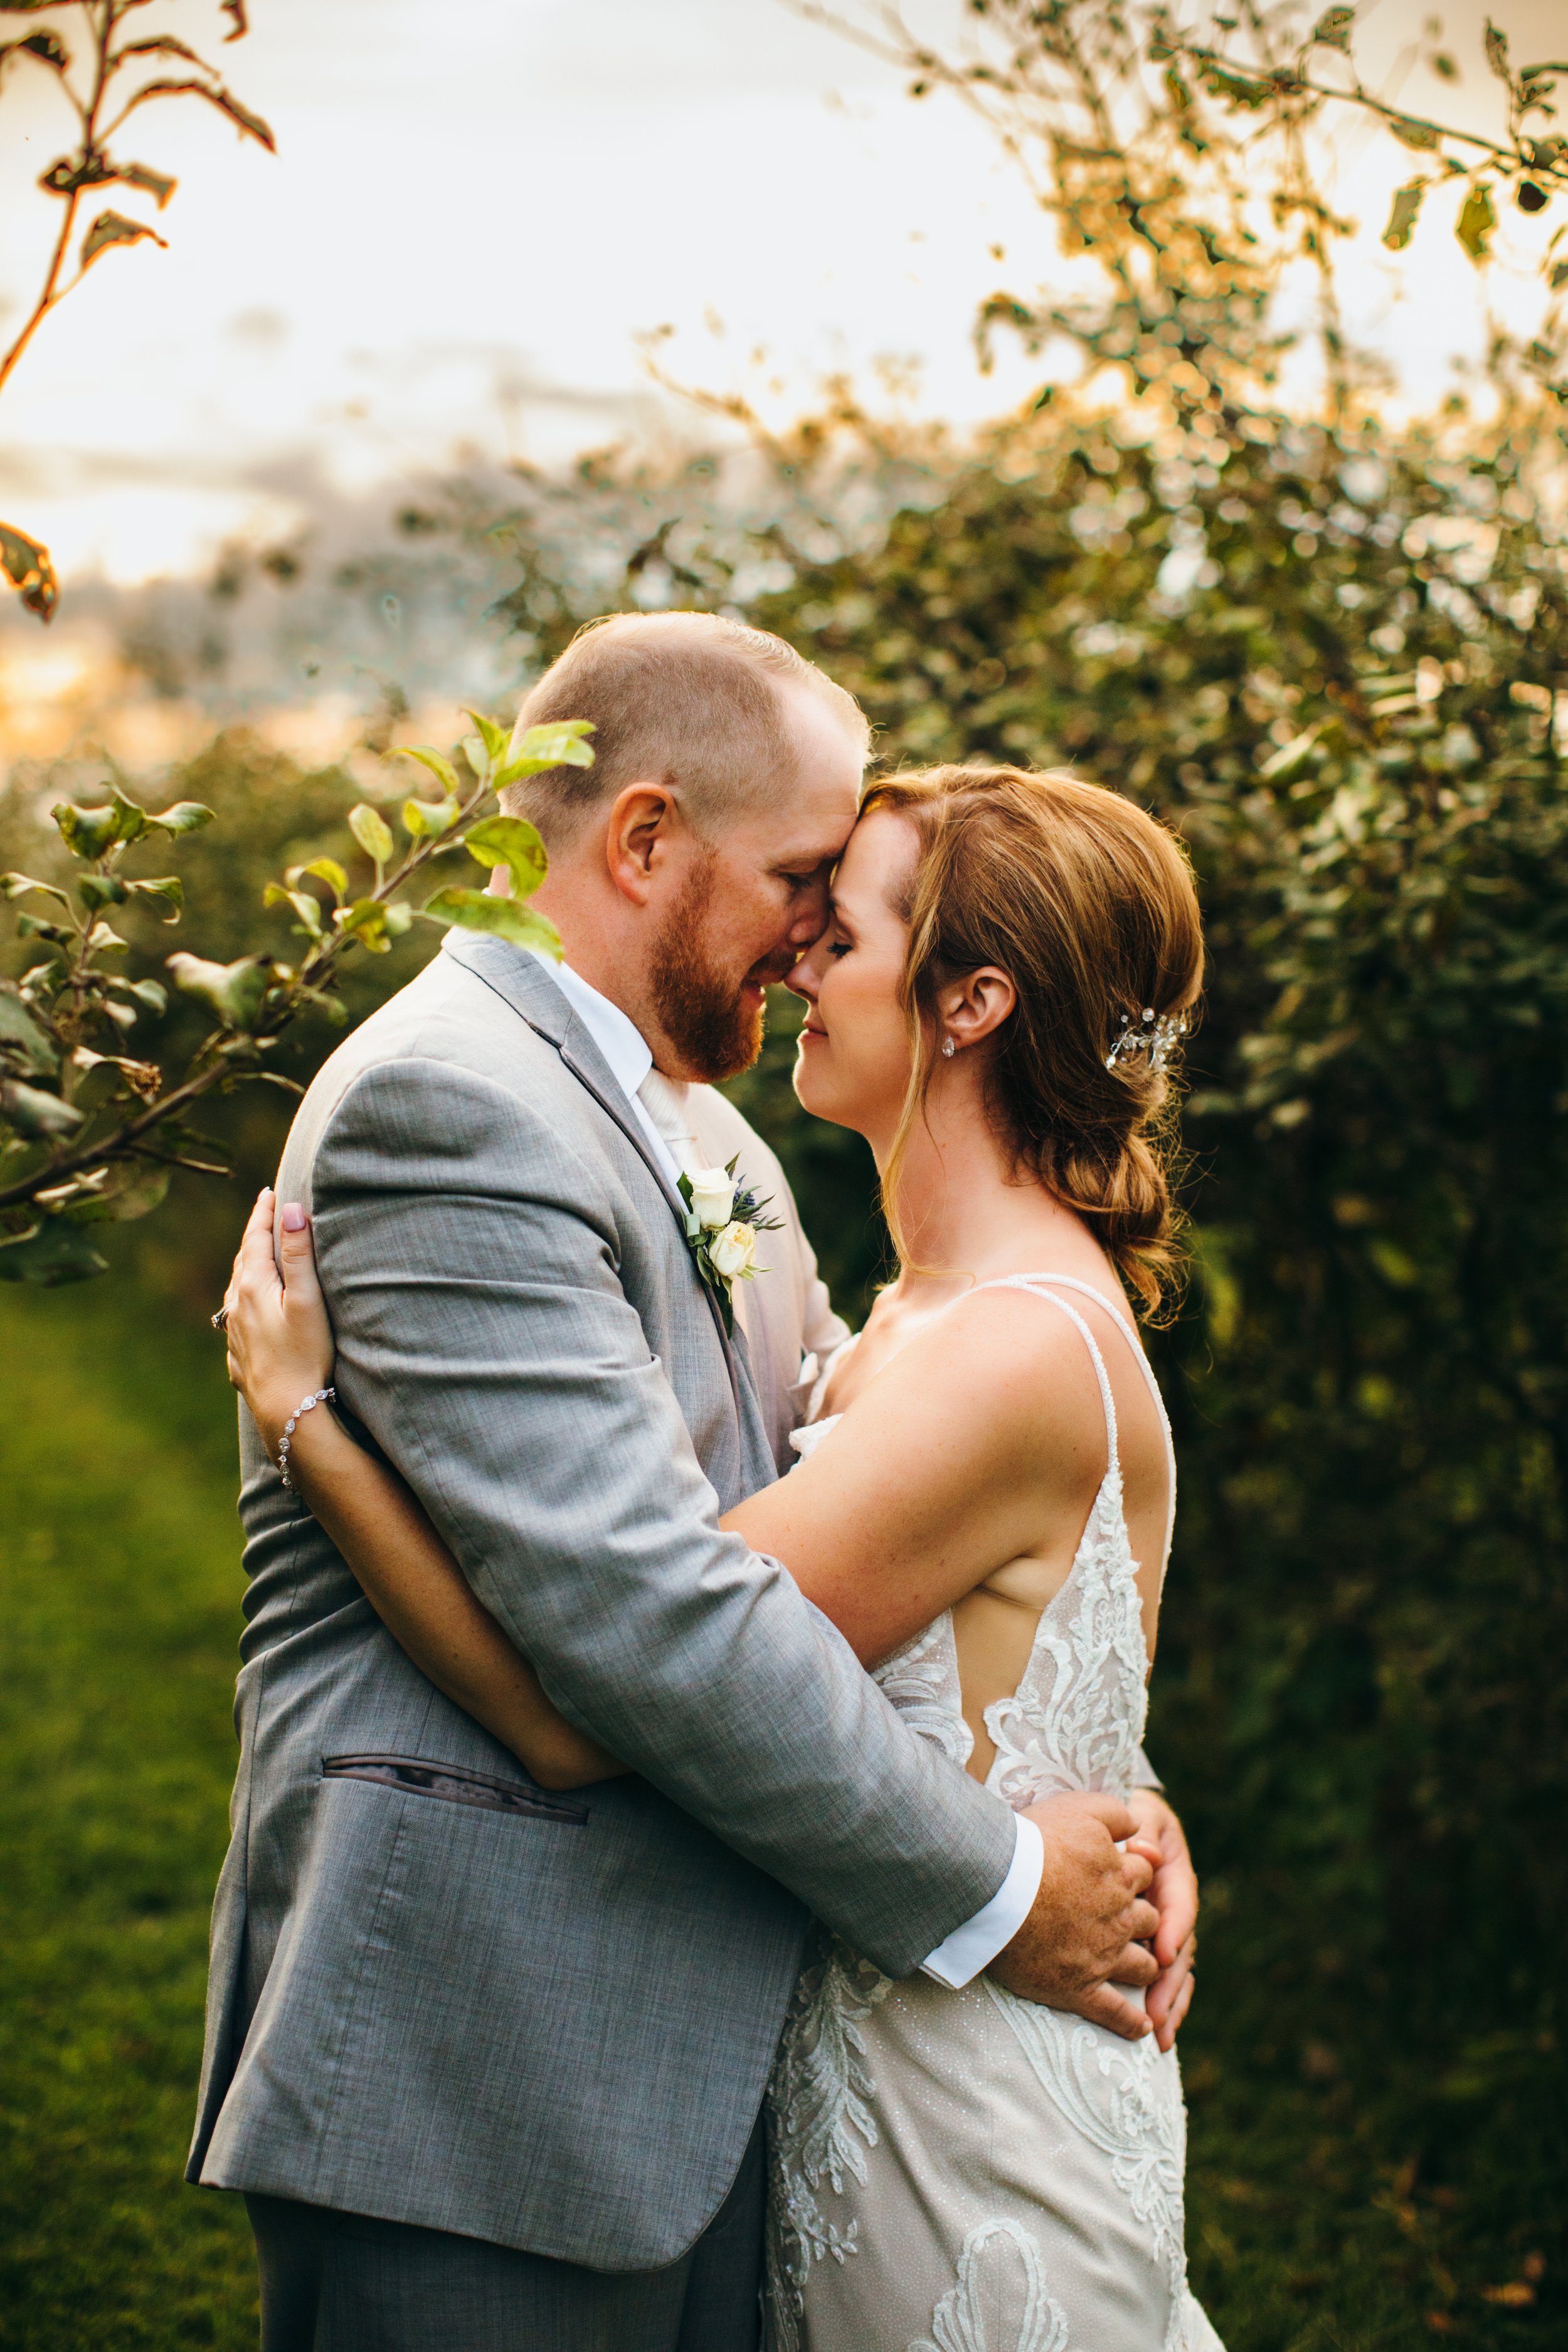  Teala Ward Photography a wedding photographer in the Illinois Valley captures a bride and groom hugging at sunset in an orchard. sunset bridals #TealaWardPhotography #IllinoisValleyPhotographer #summerwedding #TealaWardWeddings #Illinoisweddings  